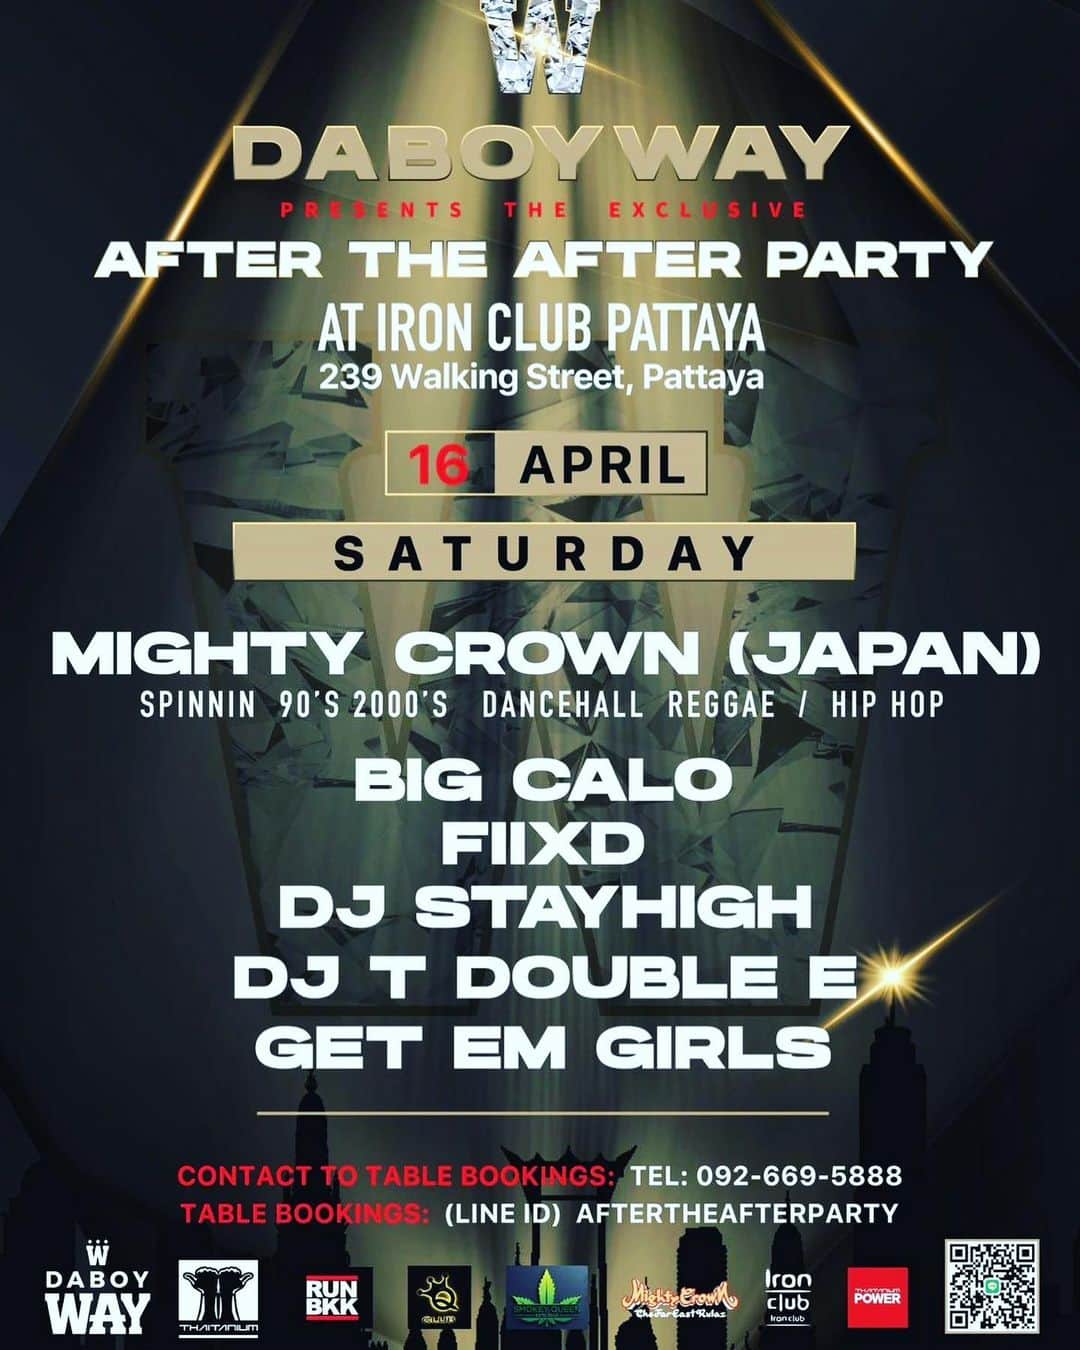 mastasimonのインスタグラム：「Thailand 🇹🇭  @daboyway presents  After The After Party !  Mighty Crown spinning 90’s 2000’s Dancehall / Reggae / Hip Hop   April 16th Saturday !  タイのパタヤでアフターのアフターパーティーで呼ばれてプレーします  #mightycrown #thailand #daboyway #thaitanium #bigcalo #pattaya #rollingloudthailand」